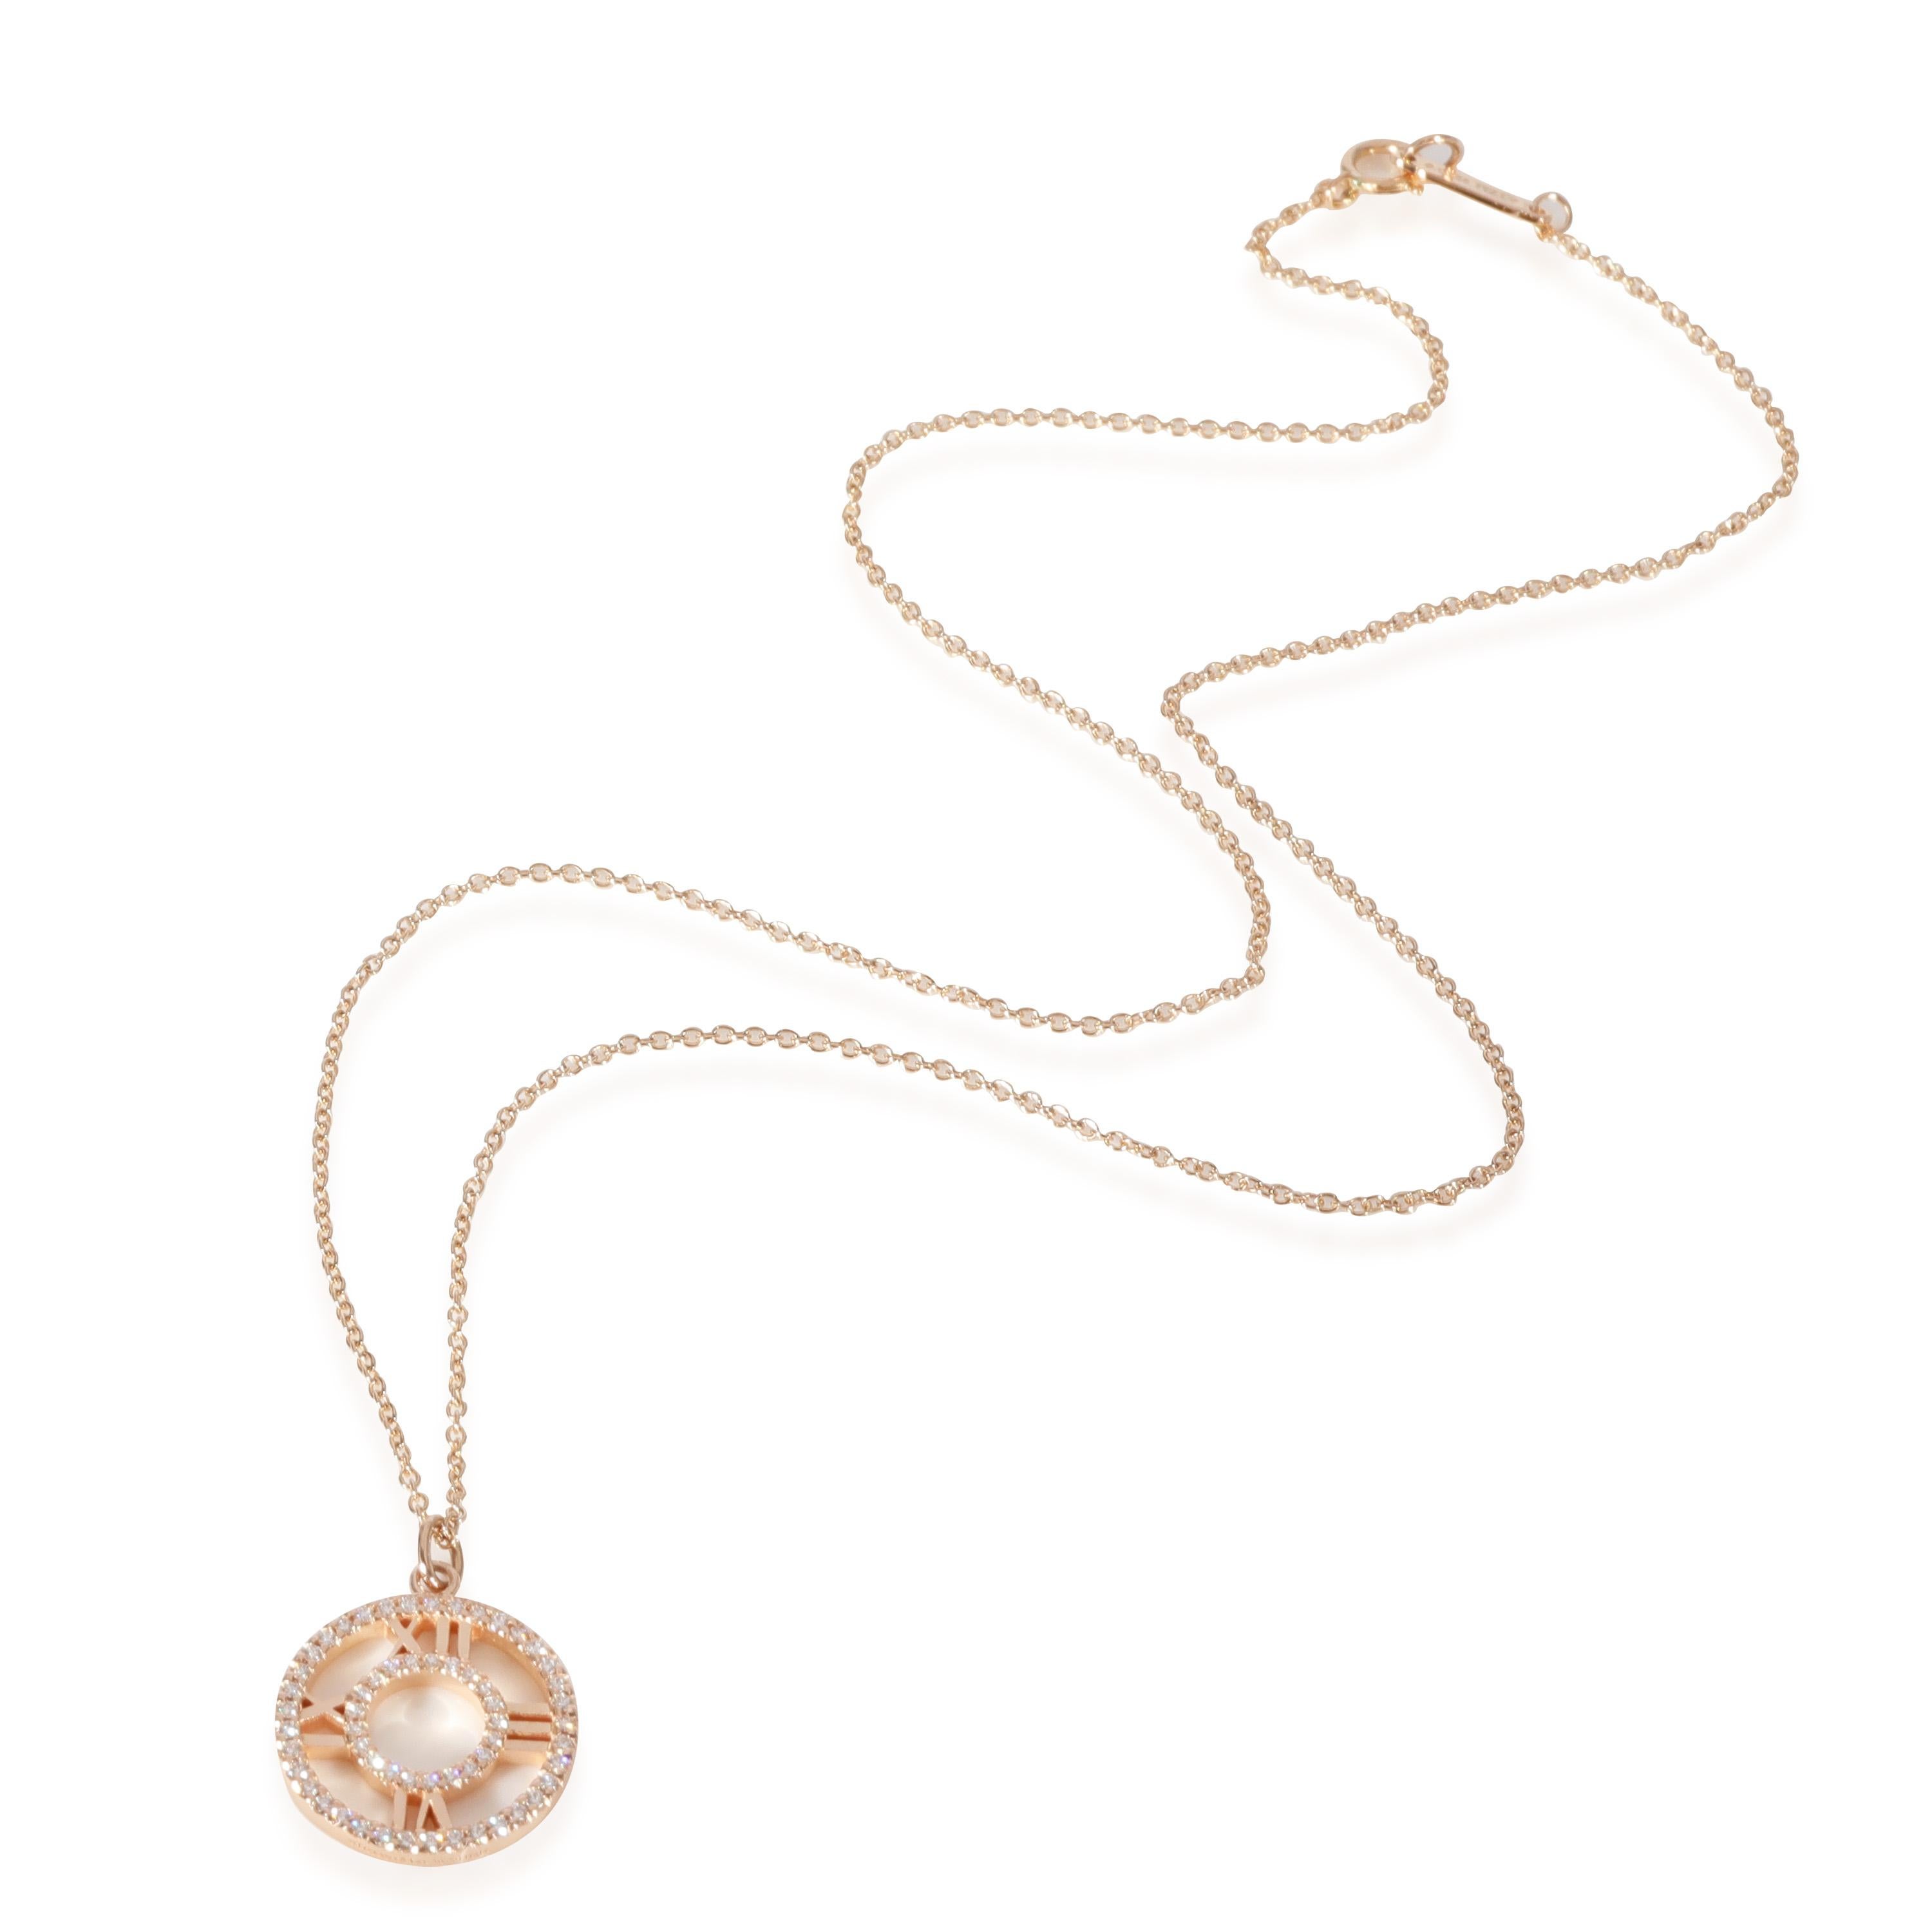 Tiffany & Co. Atlas Diamond  Pendant in 18k Rose Gold 0.24 CTW

PRIMARY DETAILS
SKU: 127356
Listing Title: Tiffany & Co. Atlas Diamond  Pendant in 18k Rose Gold 0.24 CTW
Condition Description: Retails for 3500 USD. In excellent condition and